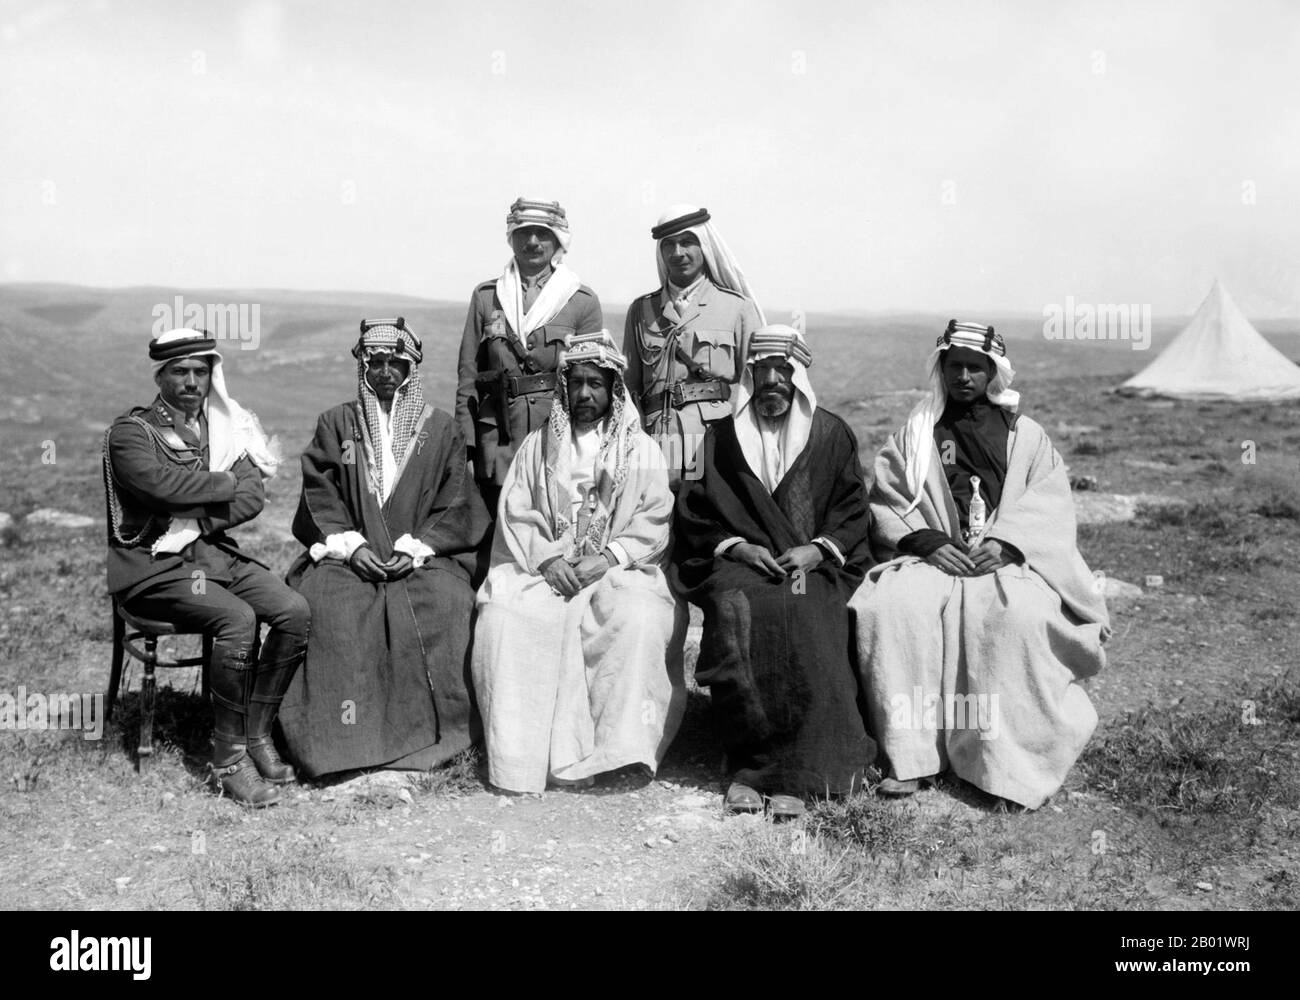 Jordan: Emir Abdullah I (February 1882 - 20 July 1951), King of Jordan (r. 1921-1946), centre, with Emir Shakir to the right, April 1921.  Abdullah I bin al-Hussein (Abd Allāh ibn al-Husayn), King of Jordan, was the second of three sons of Sherif Hussein bin Ali, Sharif and Emir of Mecca.  He was educated in Istanbul, Turkey and Hijaz. From 1909 to 1914, Abdullah sat in the Ottoman legislature, as deputy for Mecca, but allied with Britain during World War I. Between 1916 to 1918, working with the British guerrilla leader T. E. Lawrence, he played a key role in planning the Great Arab Revolt. Stock Photo